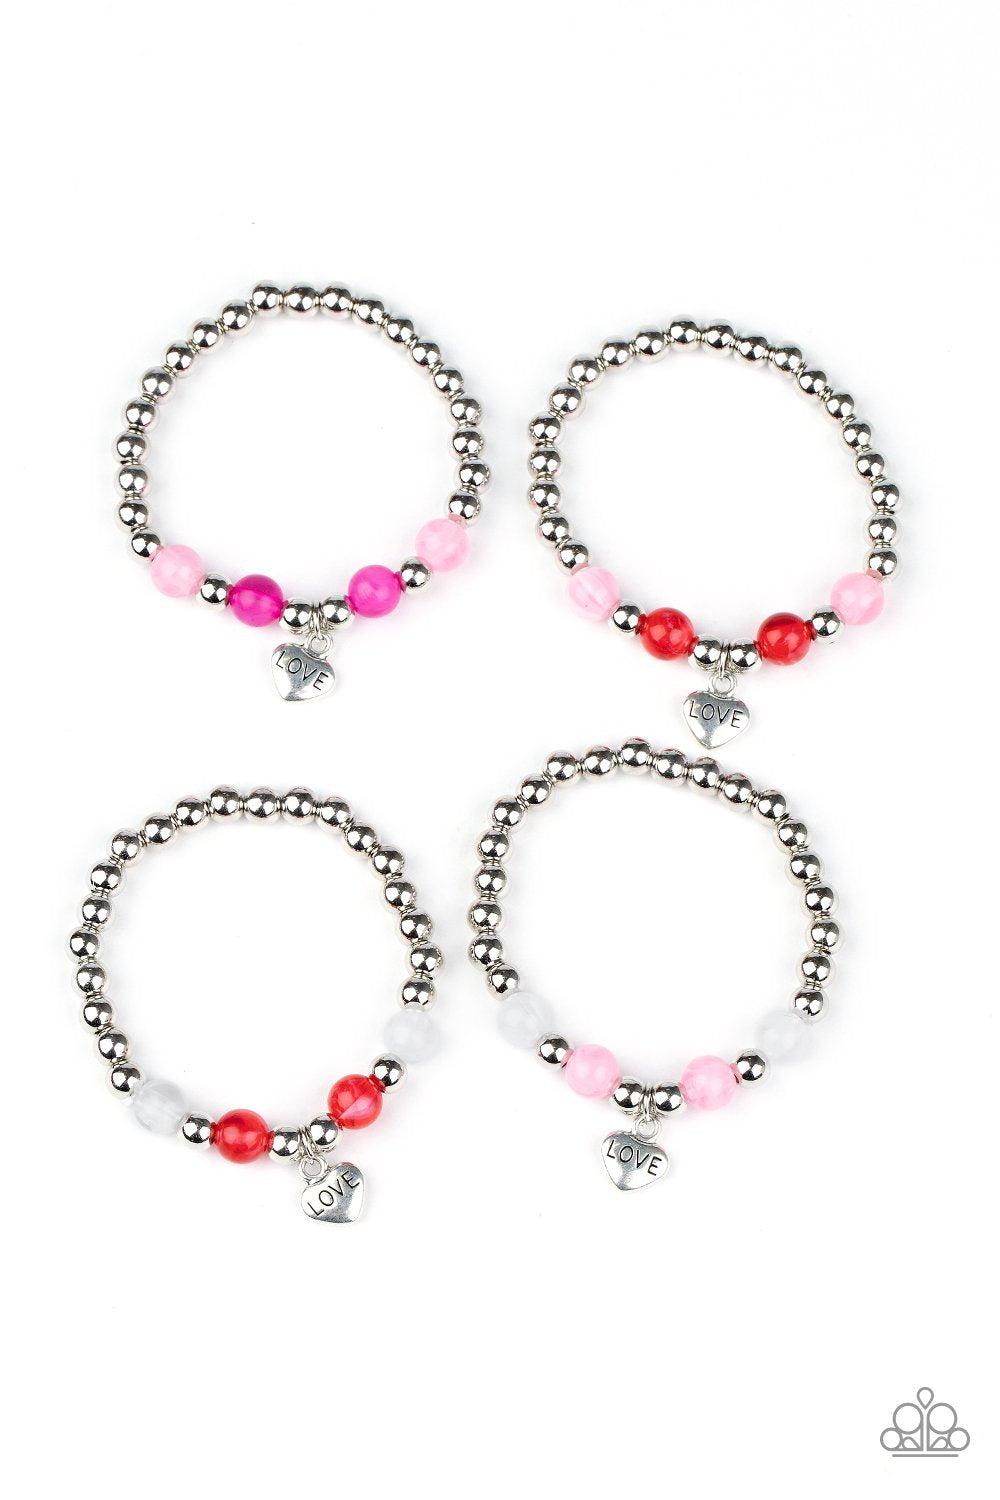 Starlet Shimmer Children&#39;s Love Heart Charm Bracelets - Paparazzi Accessories - Full set -CarasShop.com - $5 Jewelry by Cara Jewels